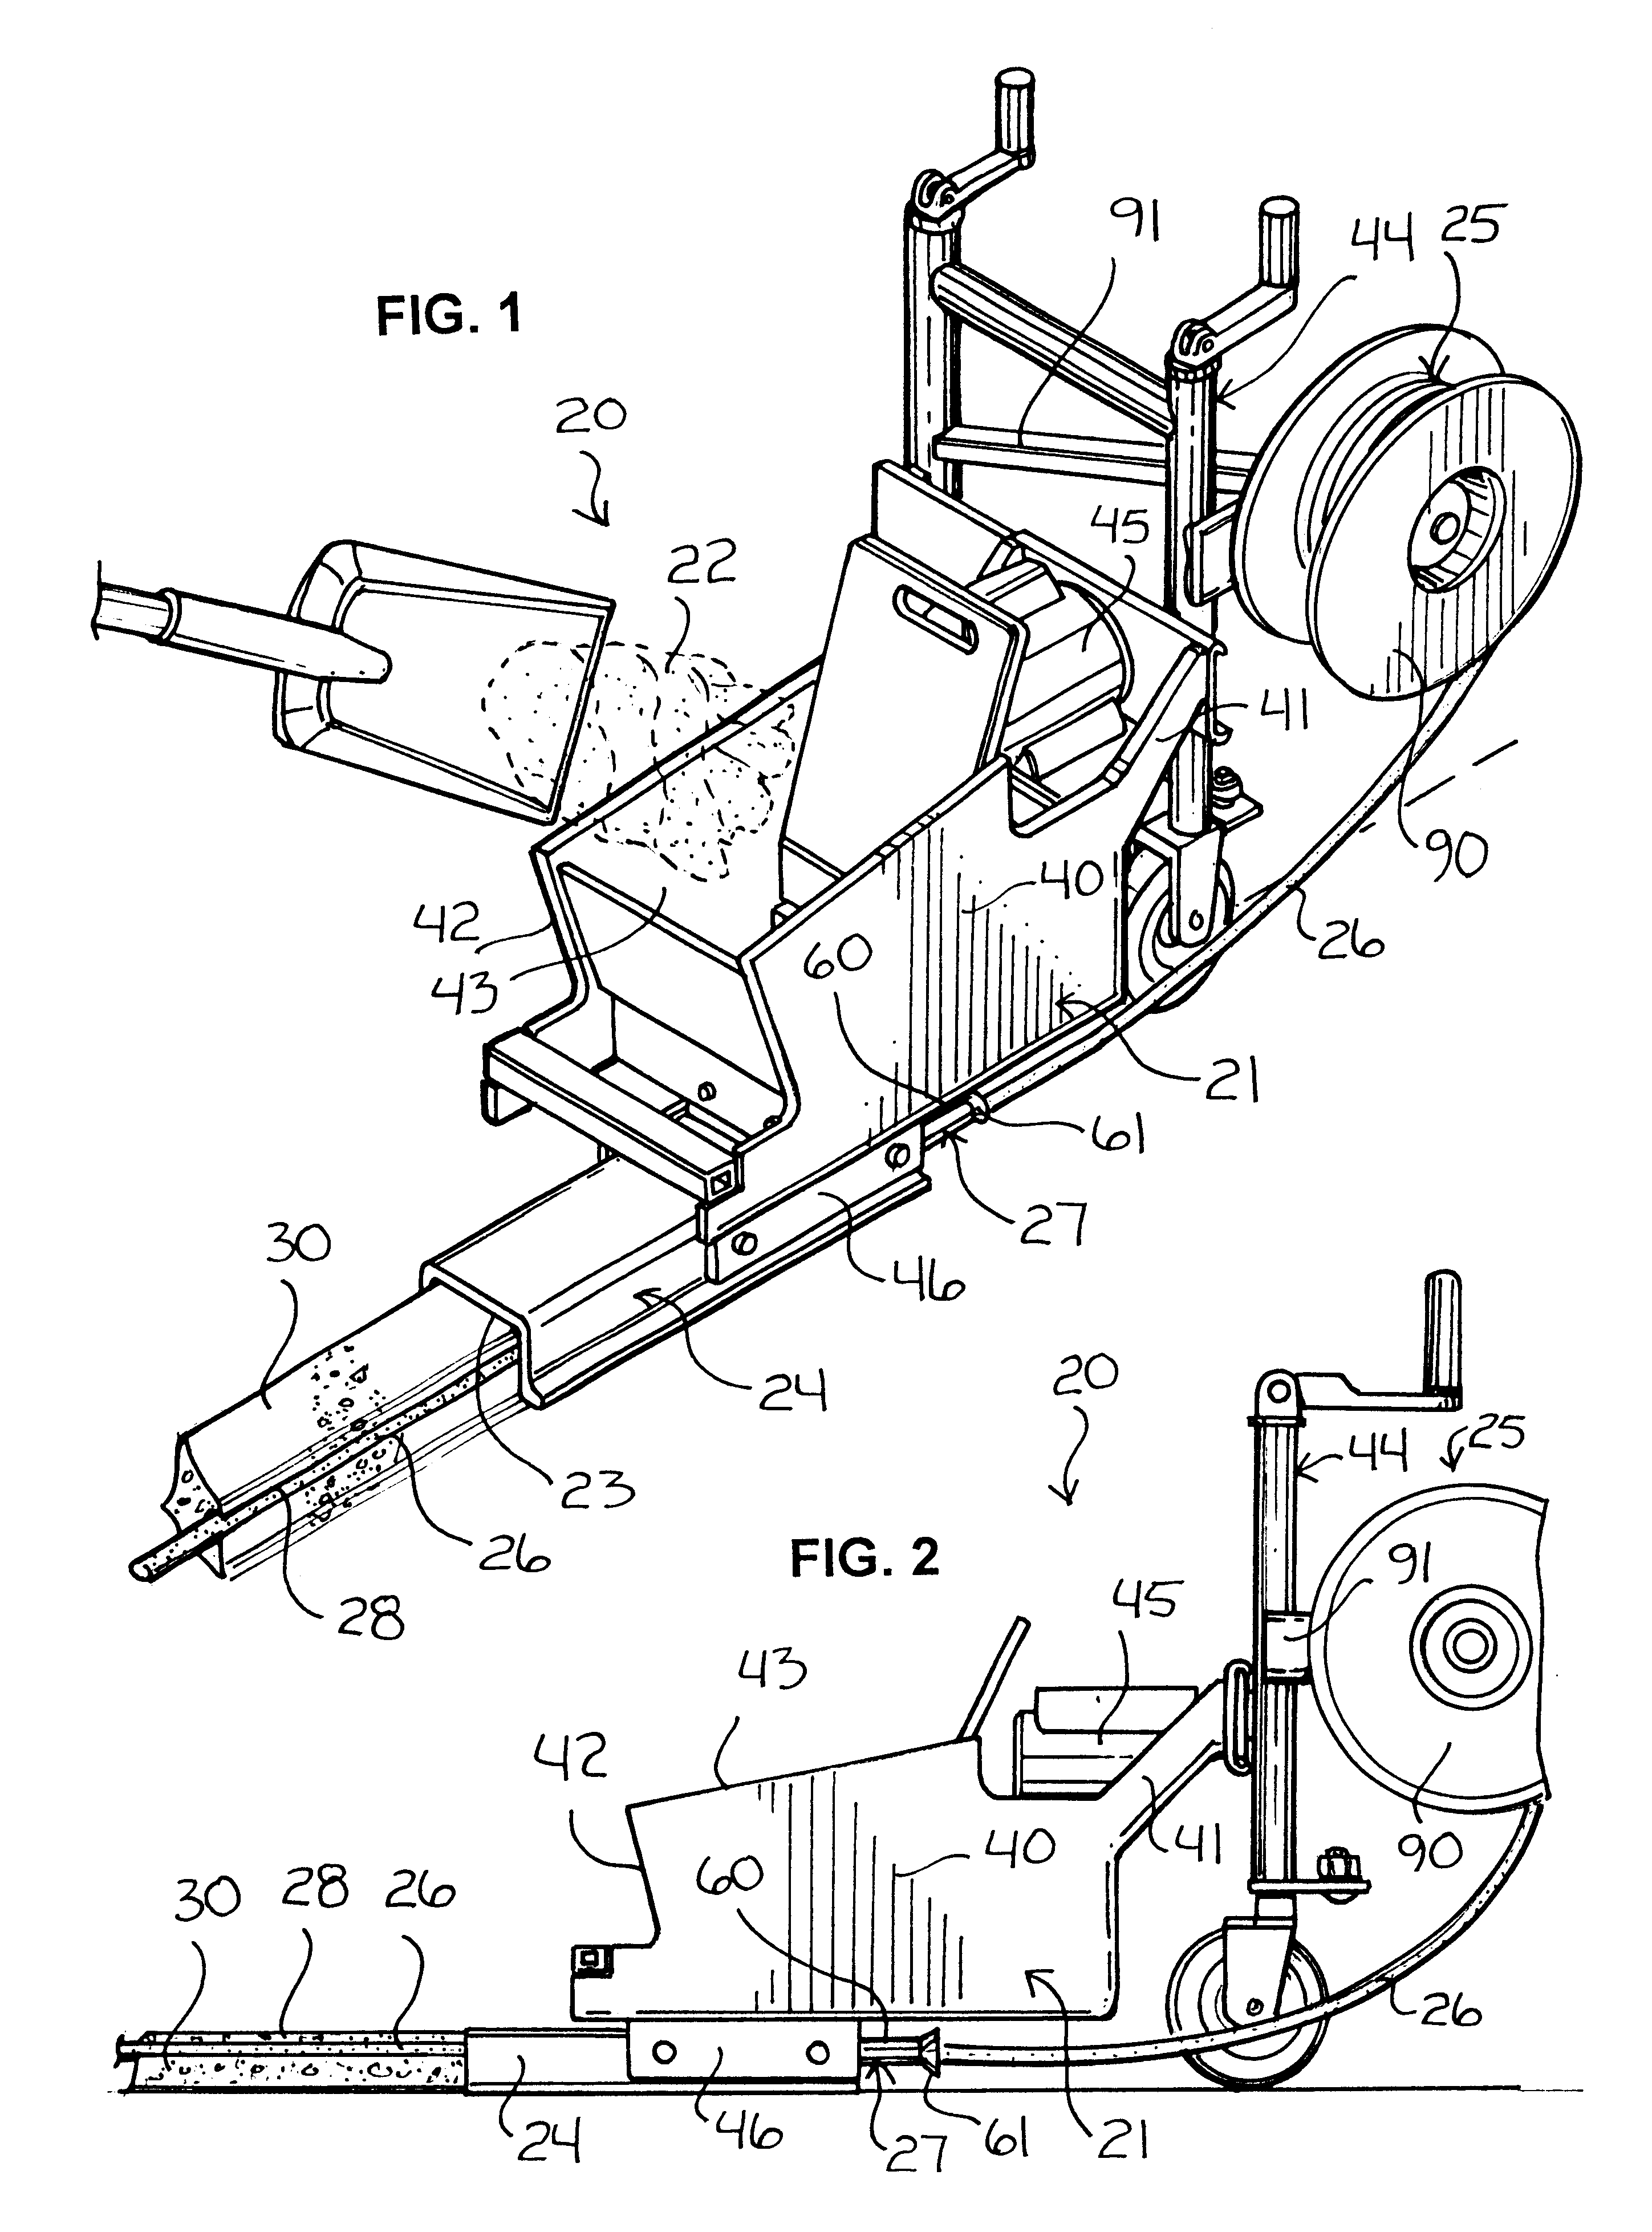 Curb forming apparatus and method